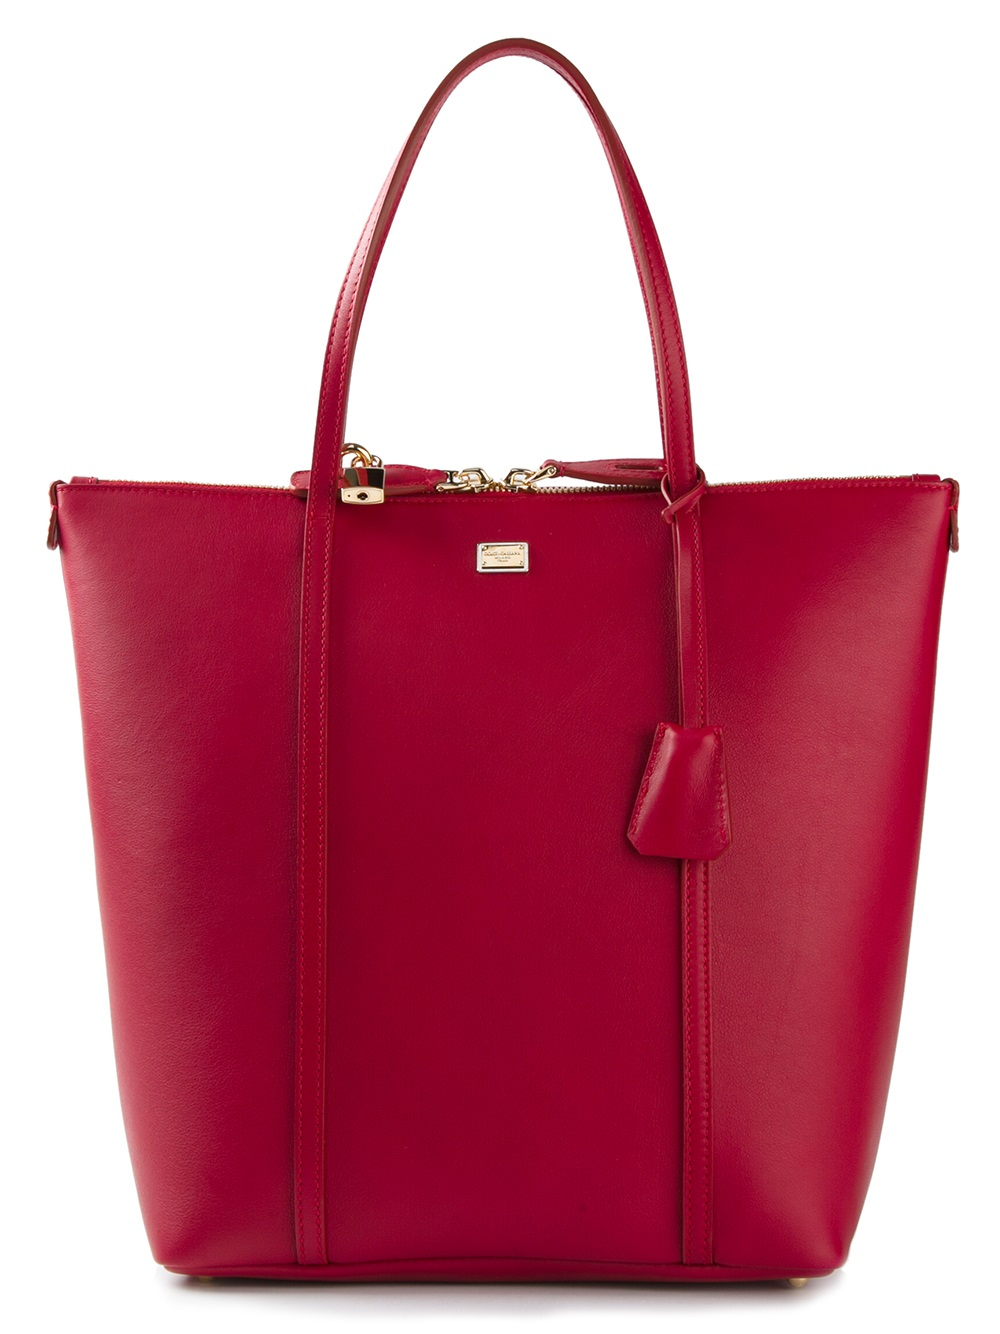 Dolce & Gabbana Shopping Bag in Red | Lyst